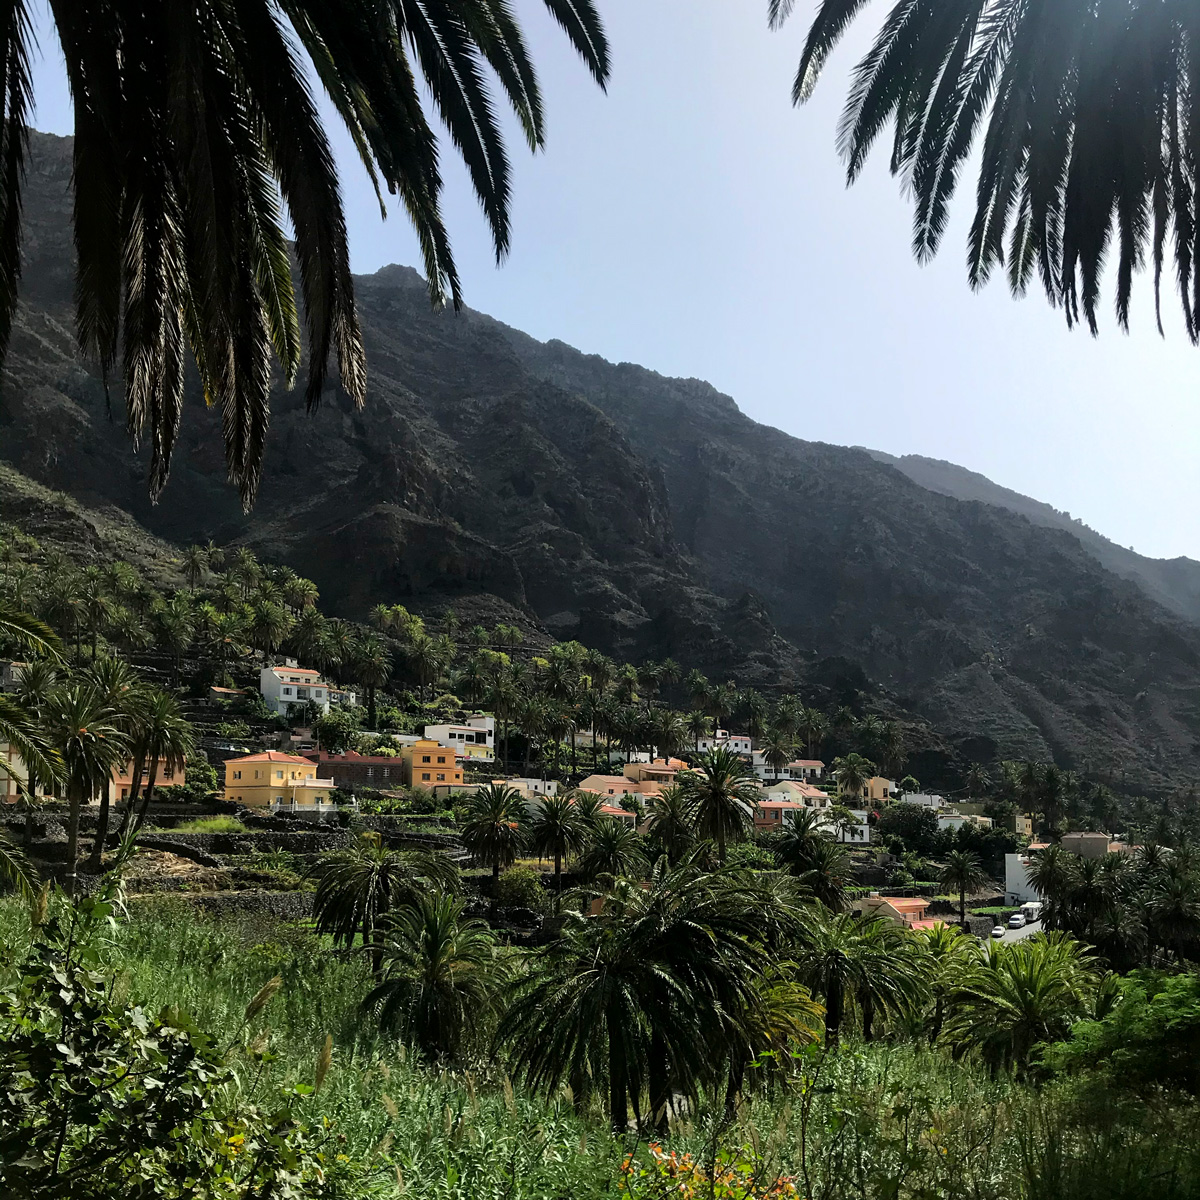 A view through palm trees to a village, with houses and farms on terraces, leading up to a mountain in the background